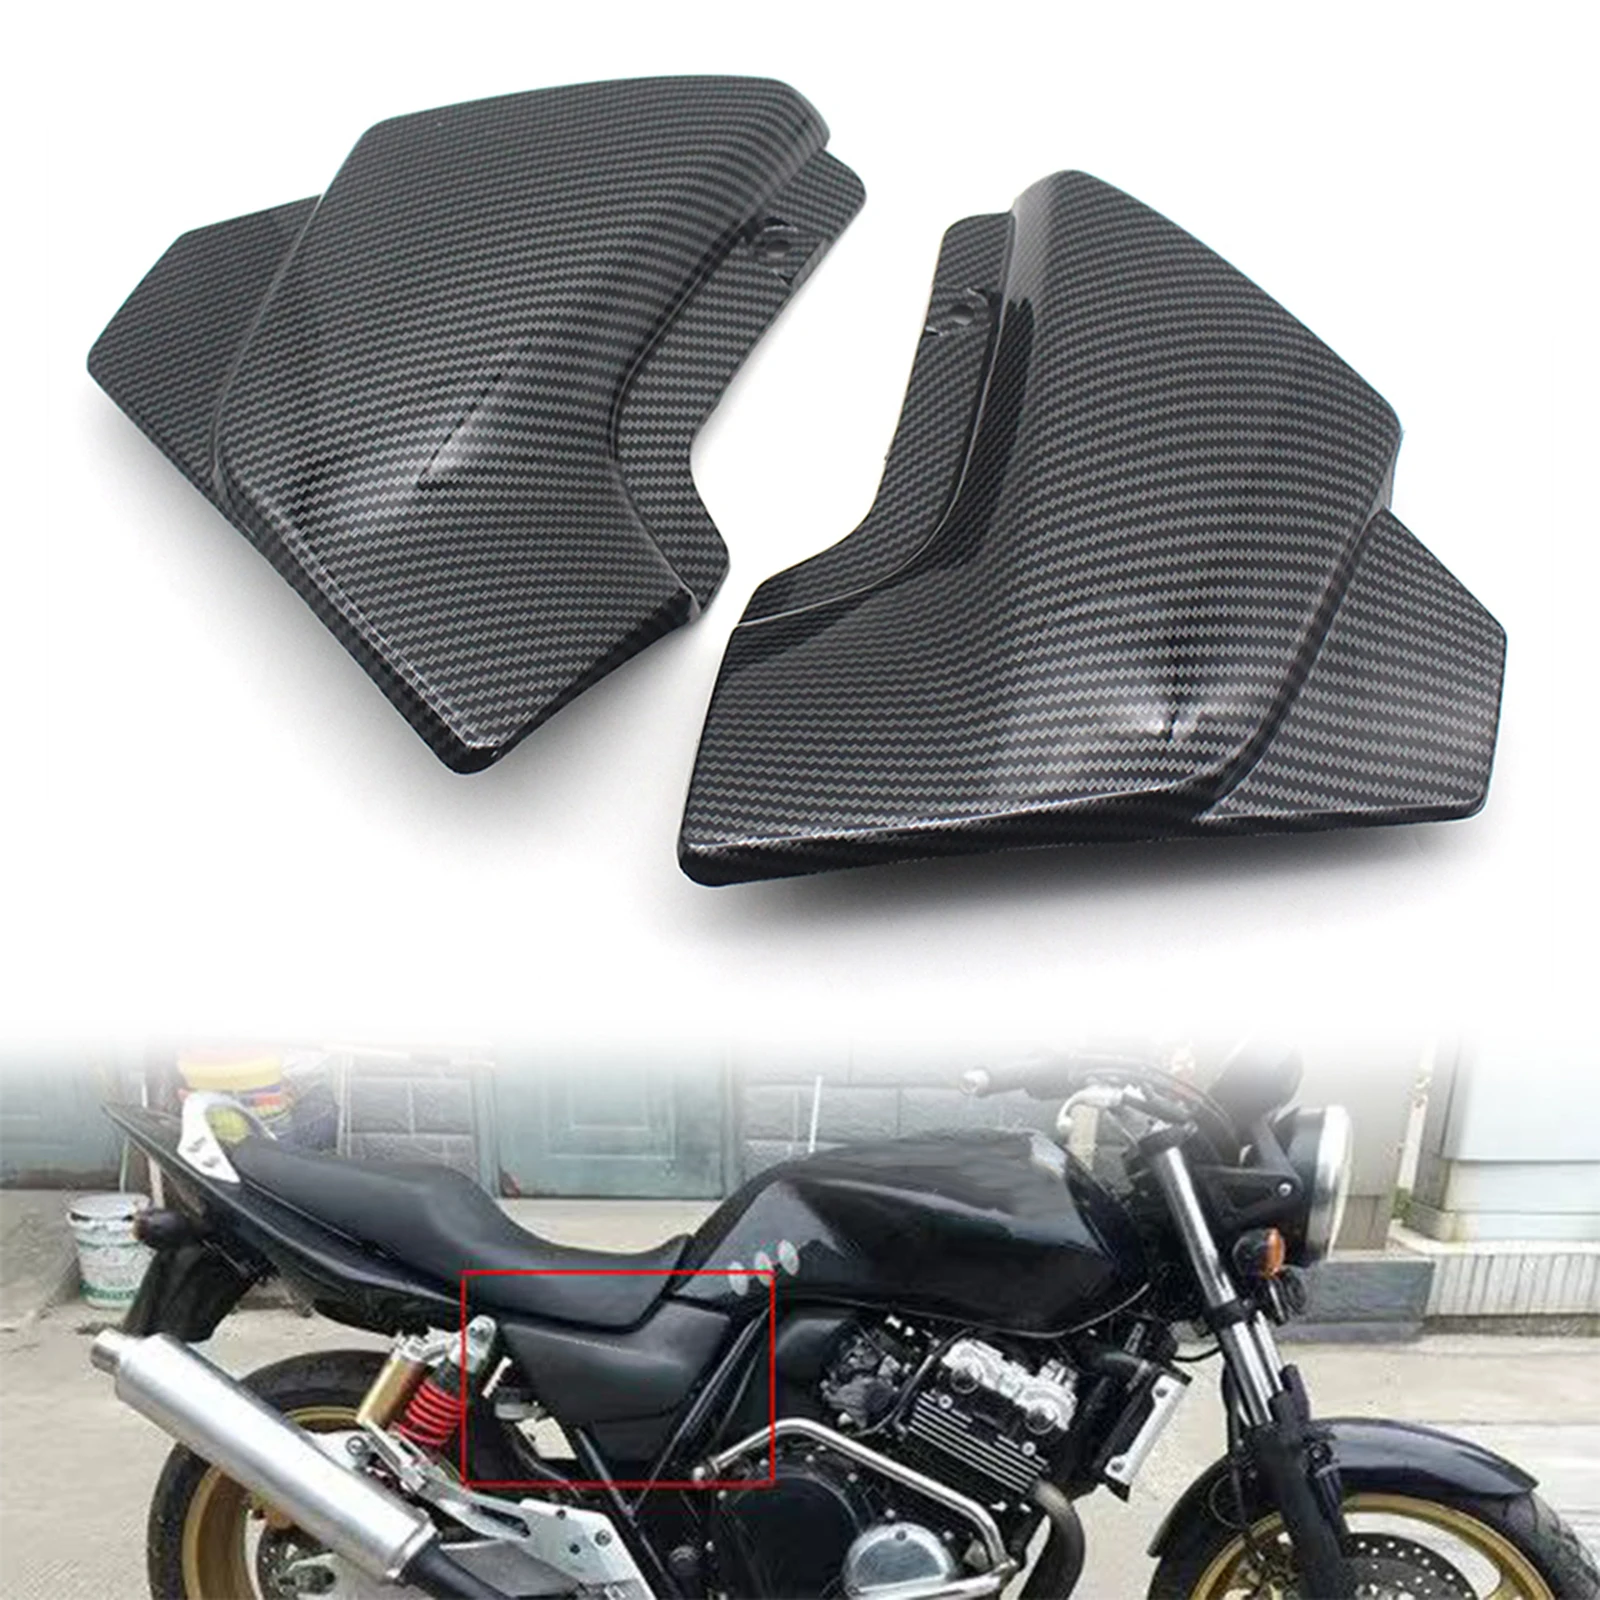 Paint Side Panel Guard Cover Spoiler Kit for Honda VTEC III CB 400 SF 2005 2006 Frame Guard Cowl Trim Motorcycle Accessories